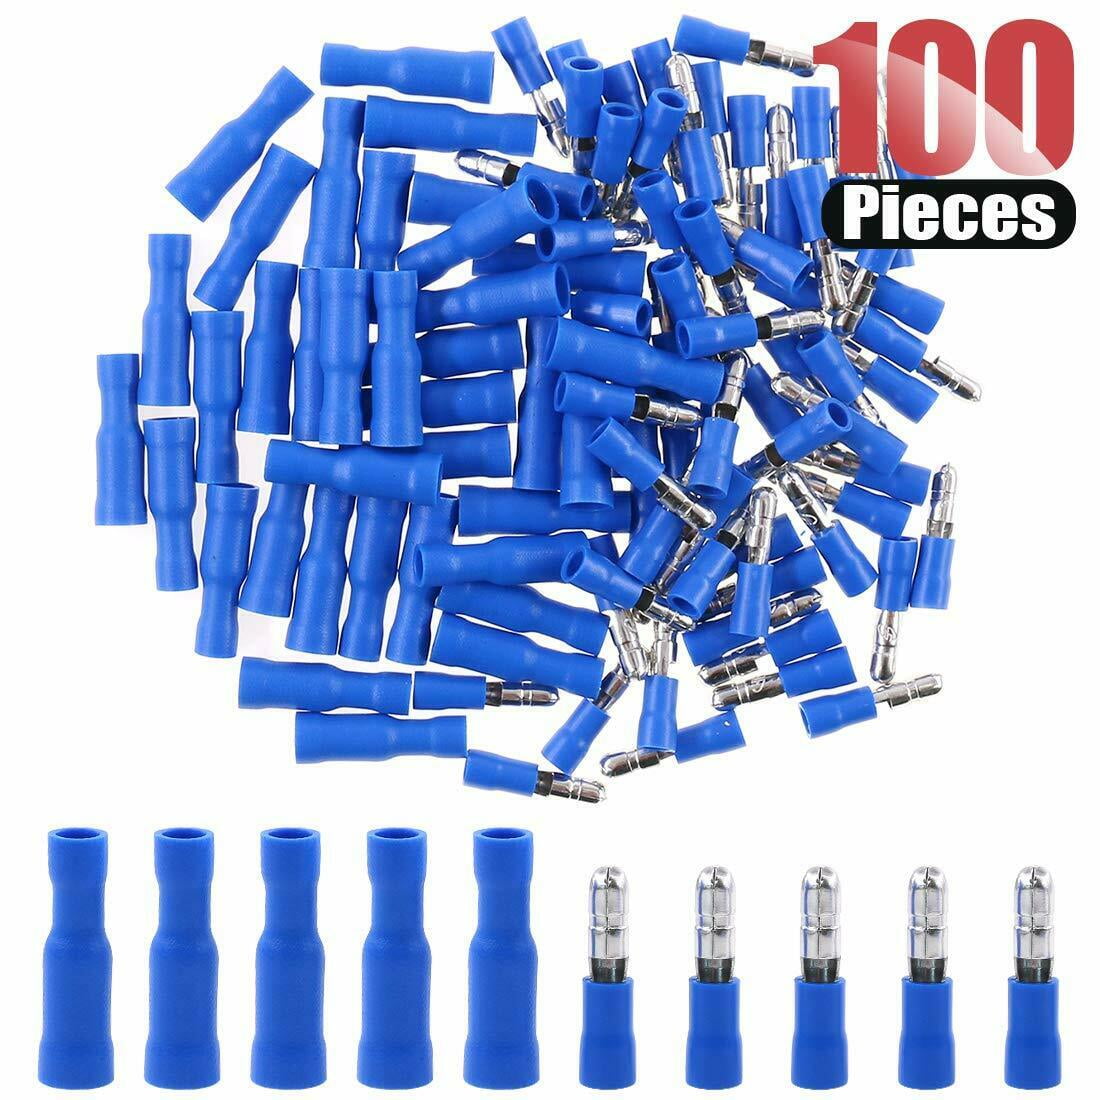 100 PCS T-TAPS /MALE INSULATED WIRE TERMINAL CONNECTORS COMBO BLUE 16-14 GAUGE 